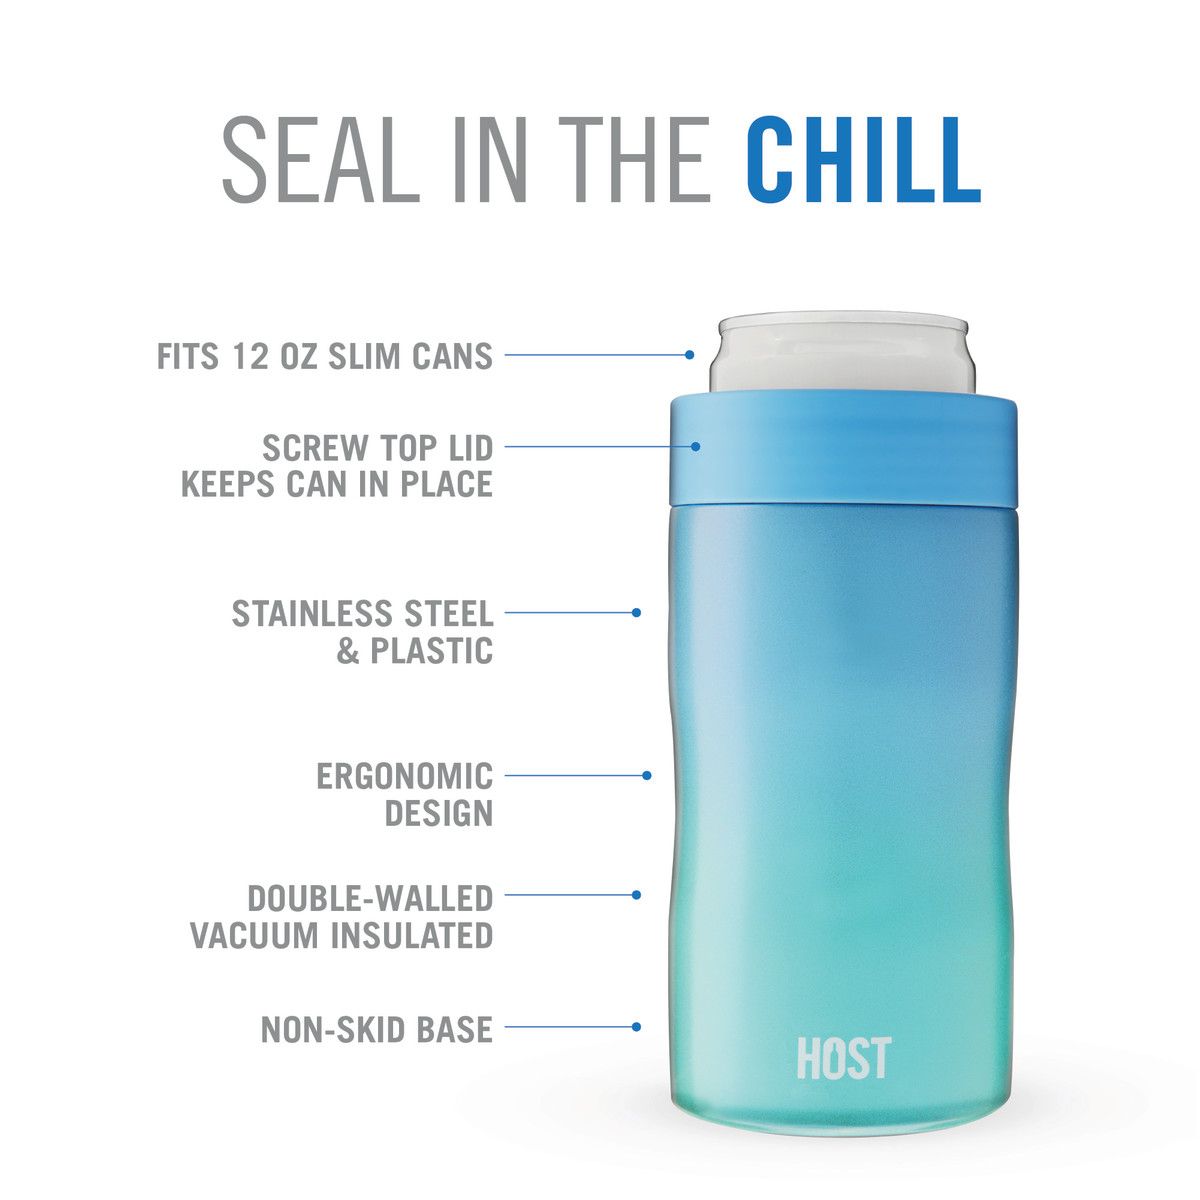 HOST Stay-Chill Slim Can Cooler